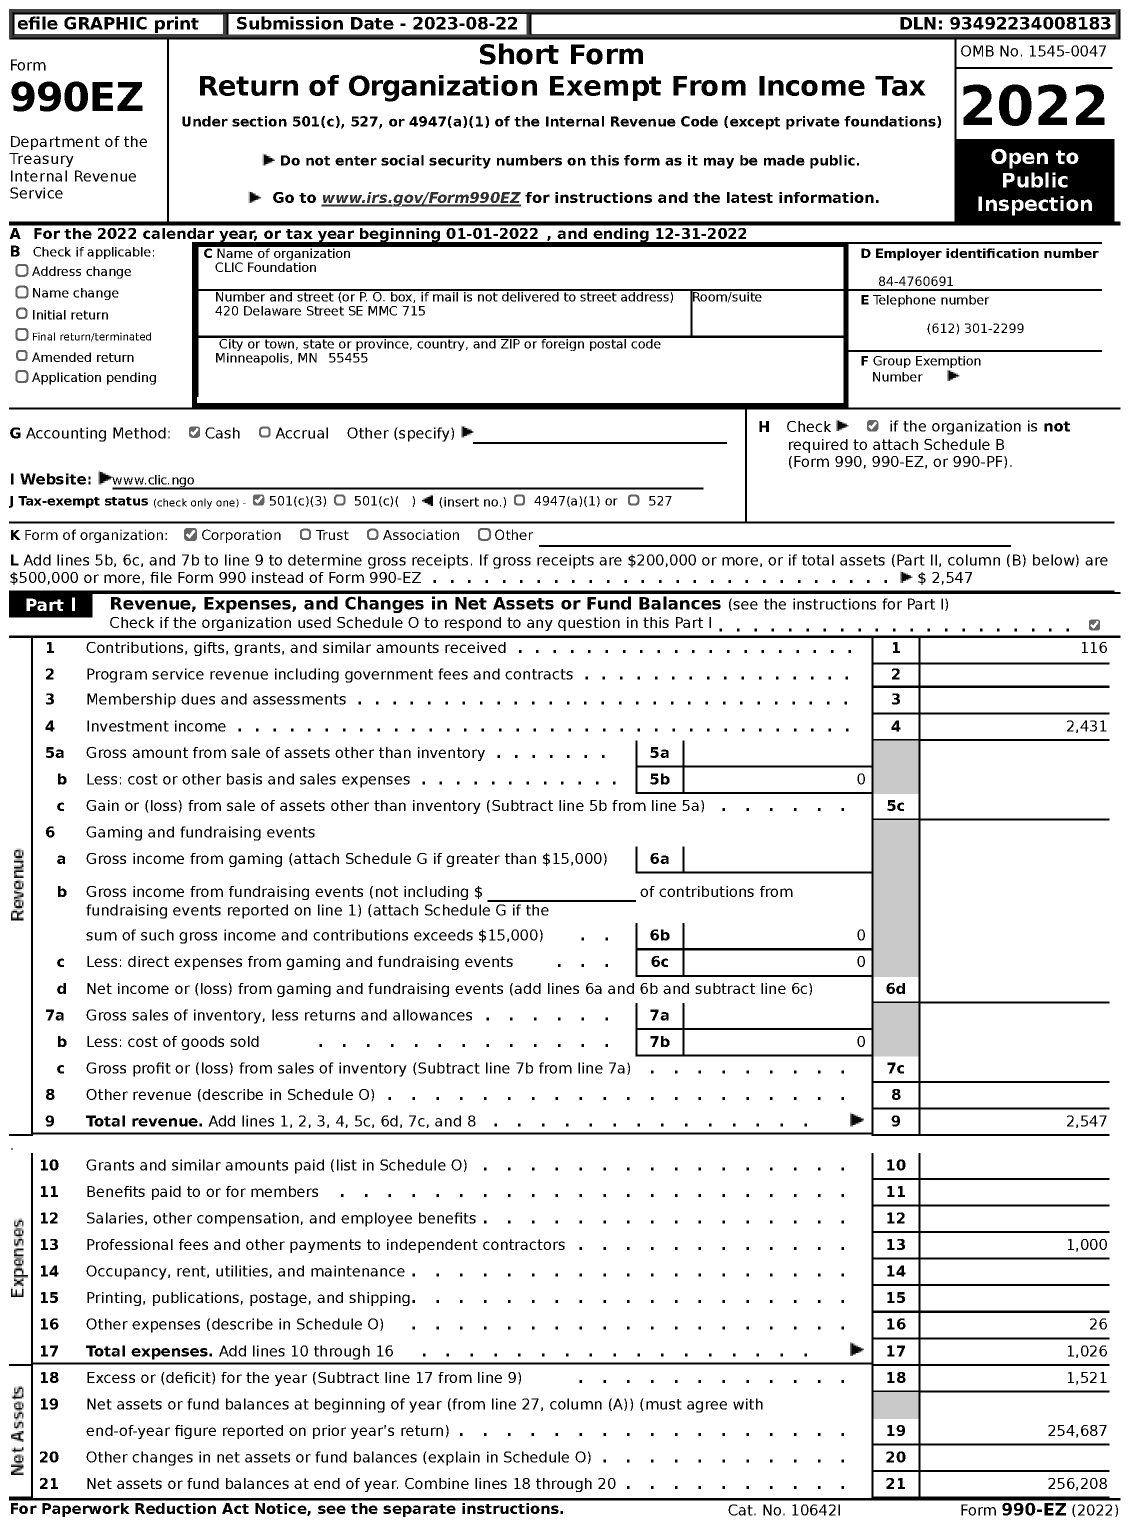 Image of first page of 2022 Form 990EZ for CLIC Foundation